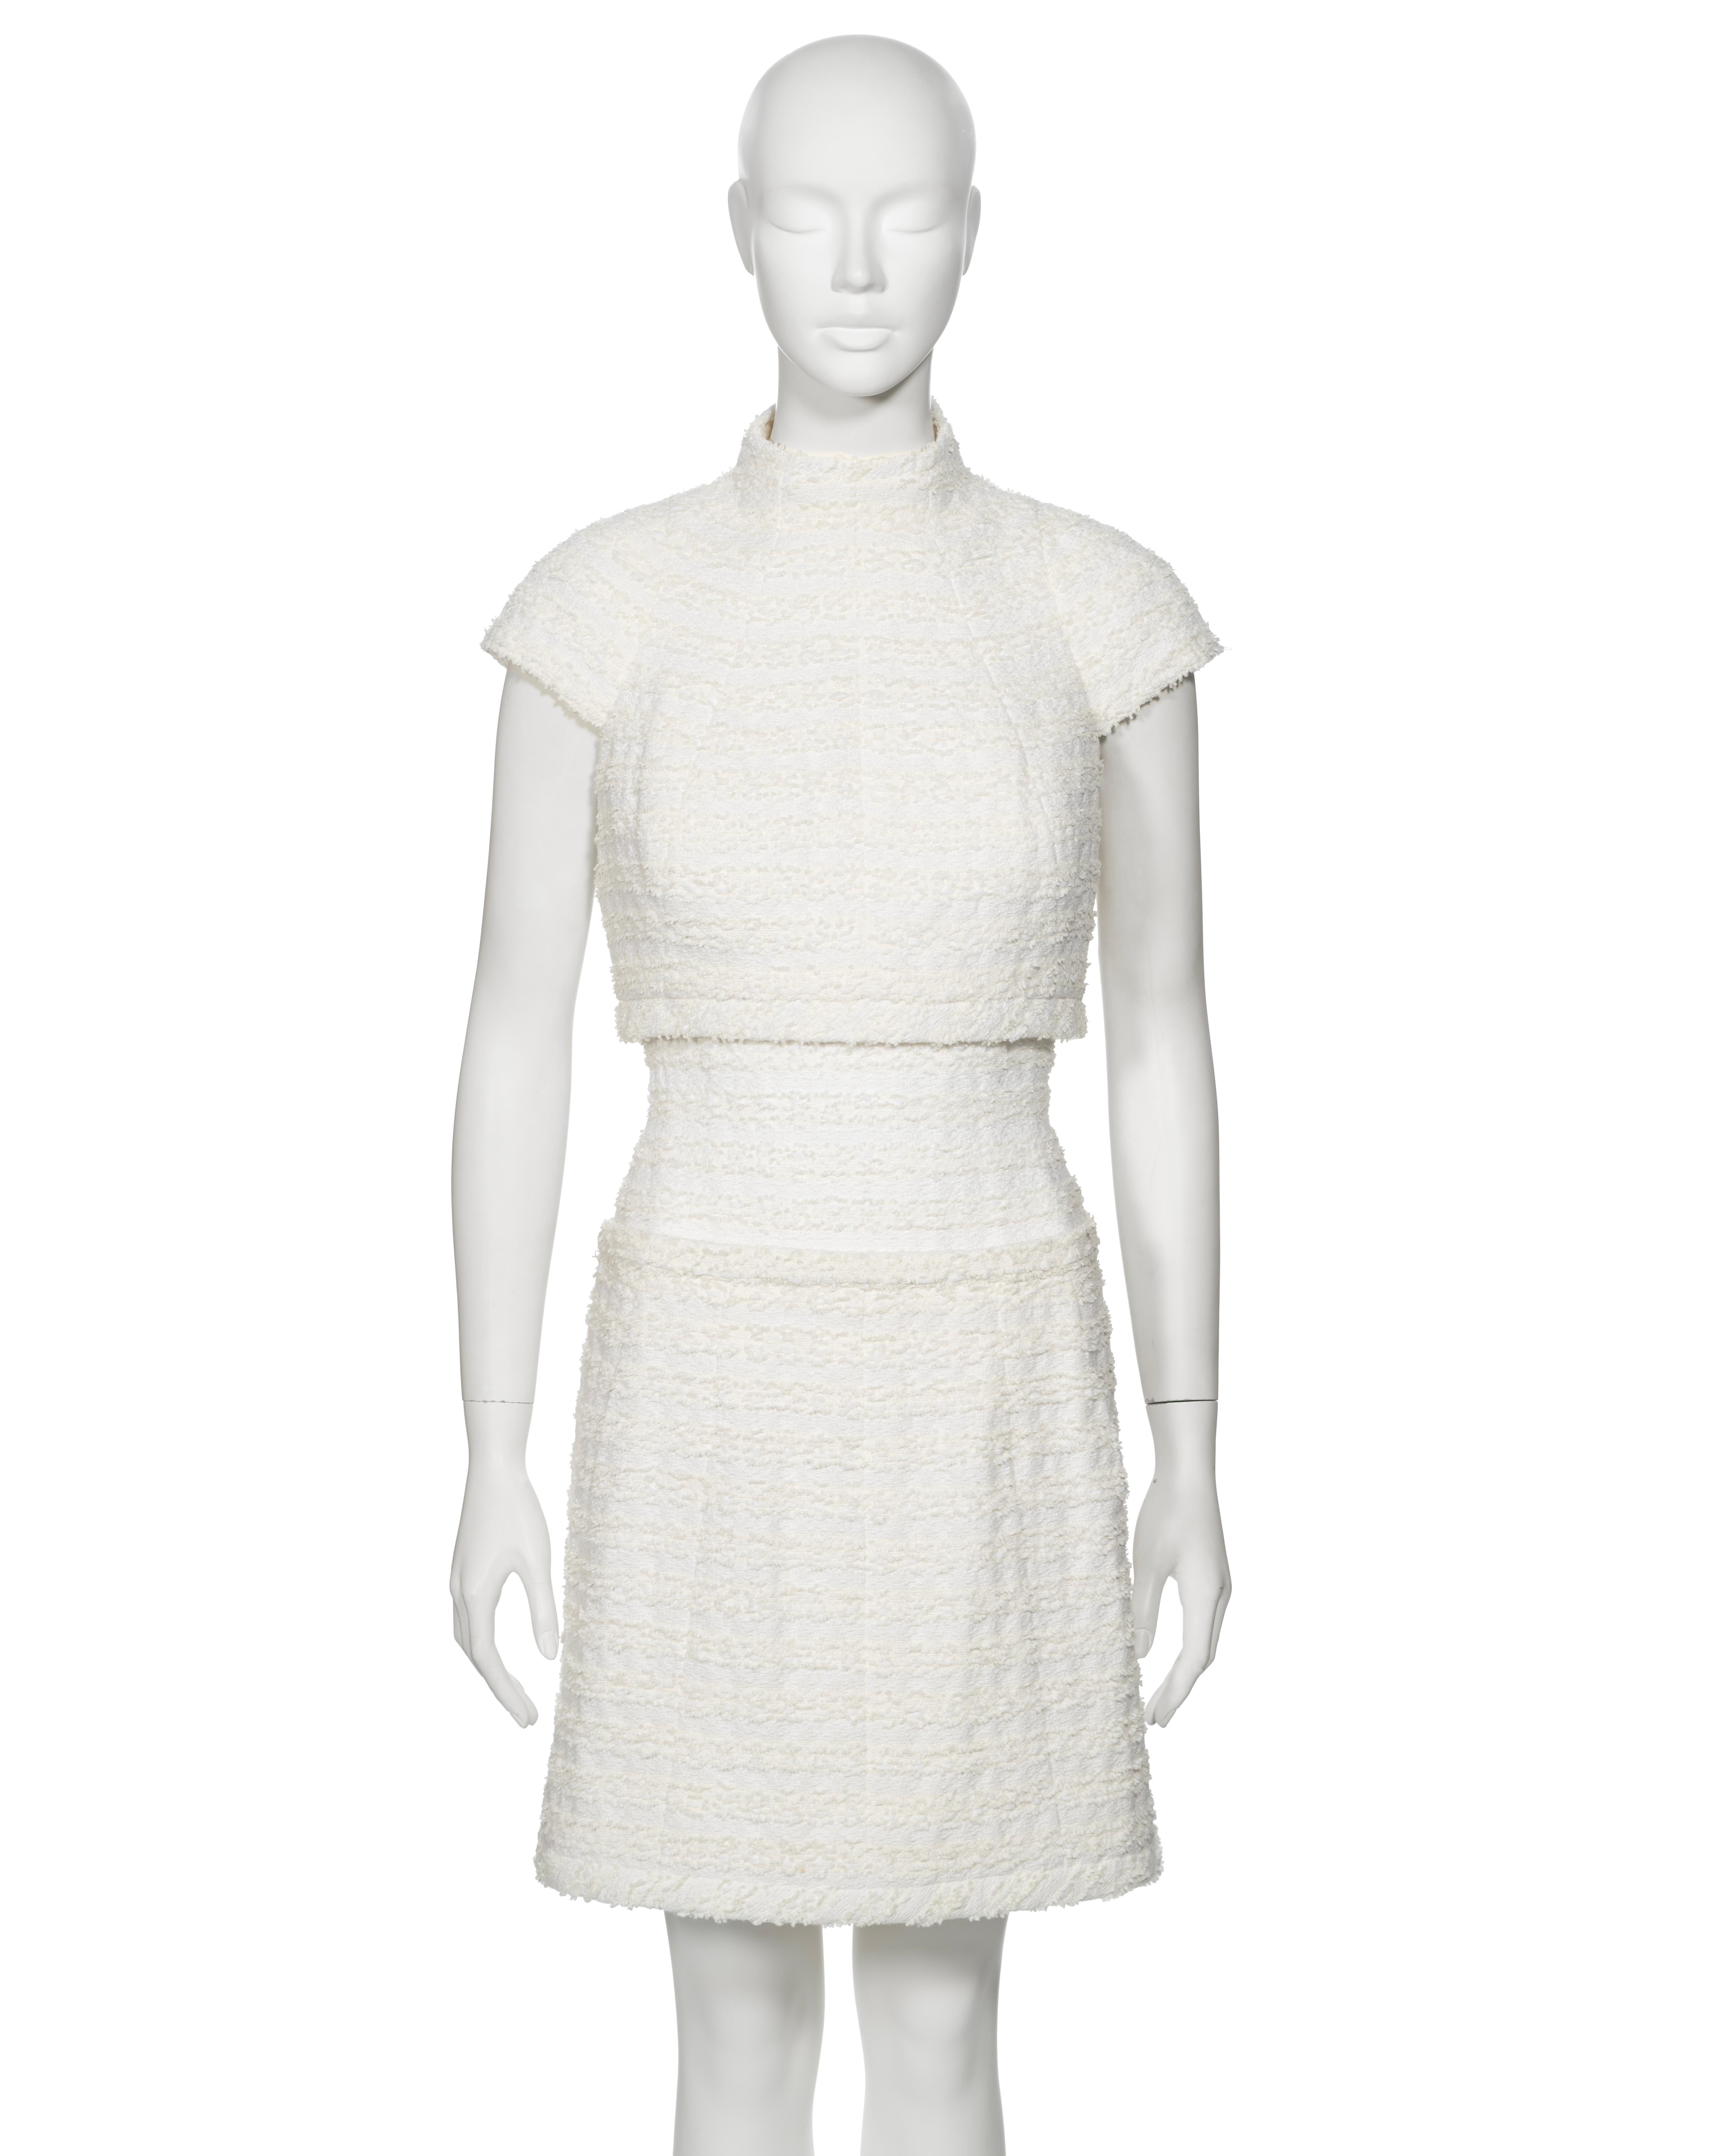 Women's Chanel by Karl Lagerfeld Haute Couture White Bouclé Corseted Skirt Suit, ss 2014 For Sale